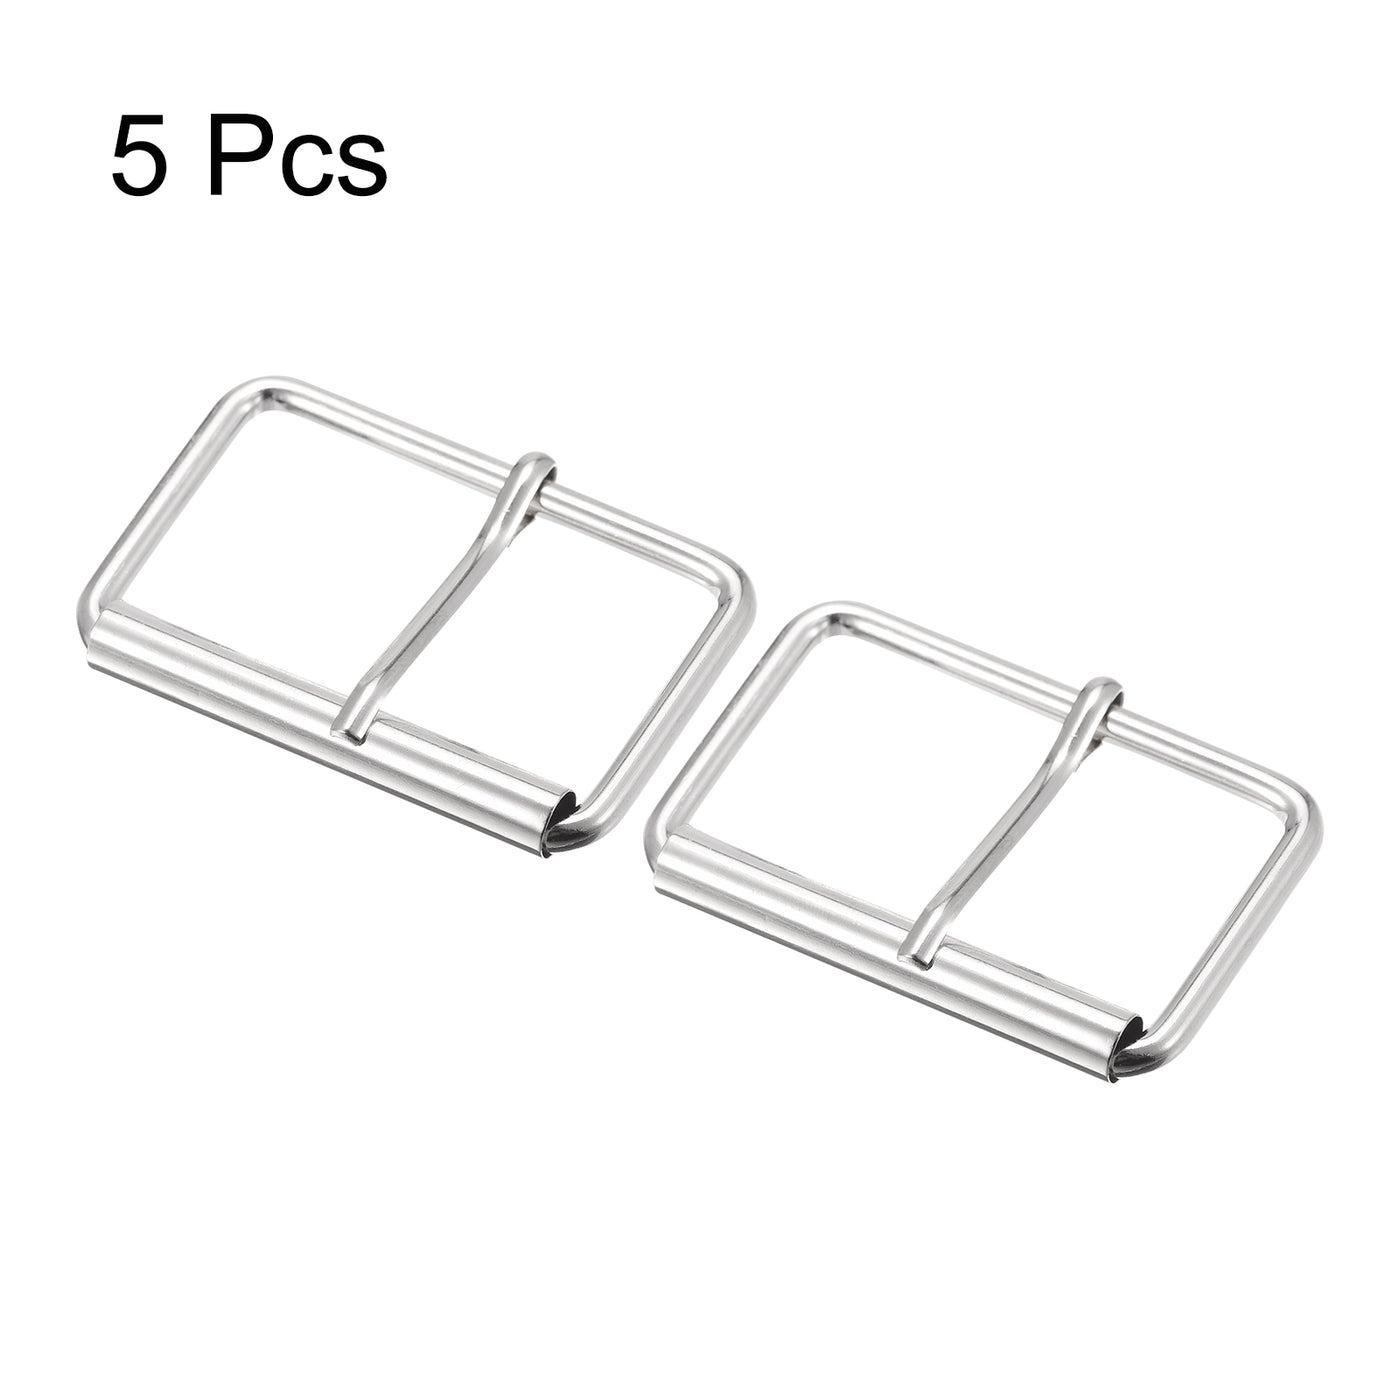 uxcell Uxcell 50mm(1.97") Metal Roller Buckles for Belts Bags Straps DIY Silver Tone 5pcs